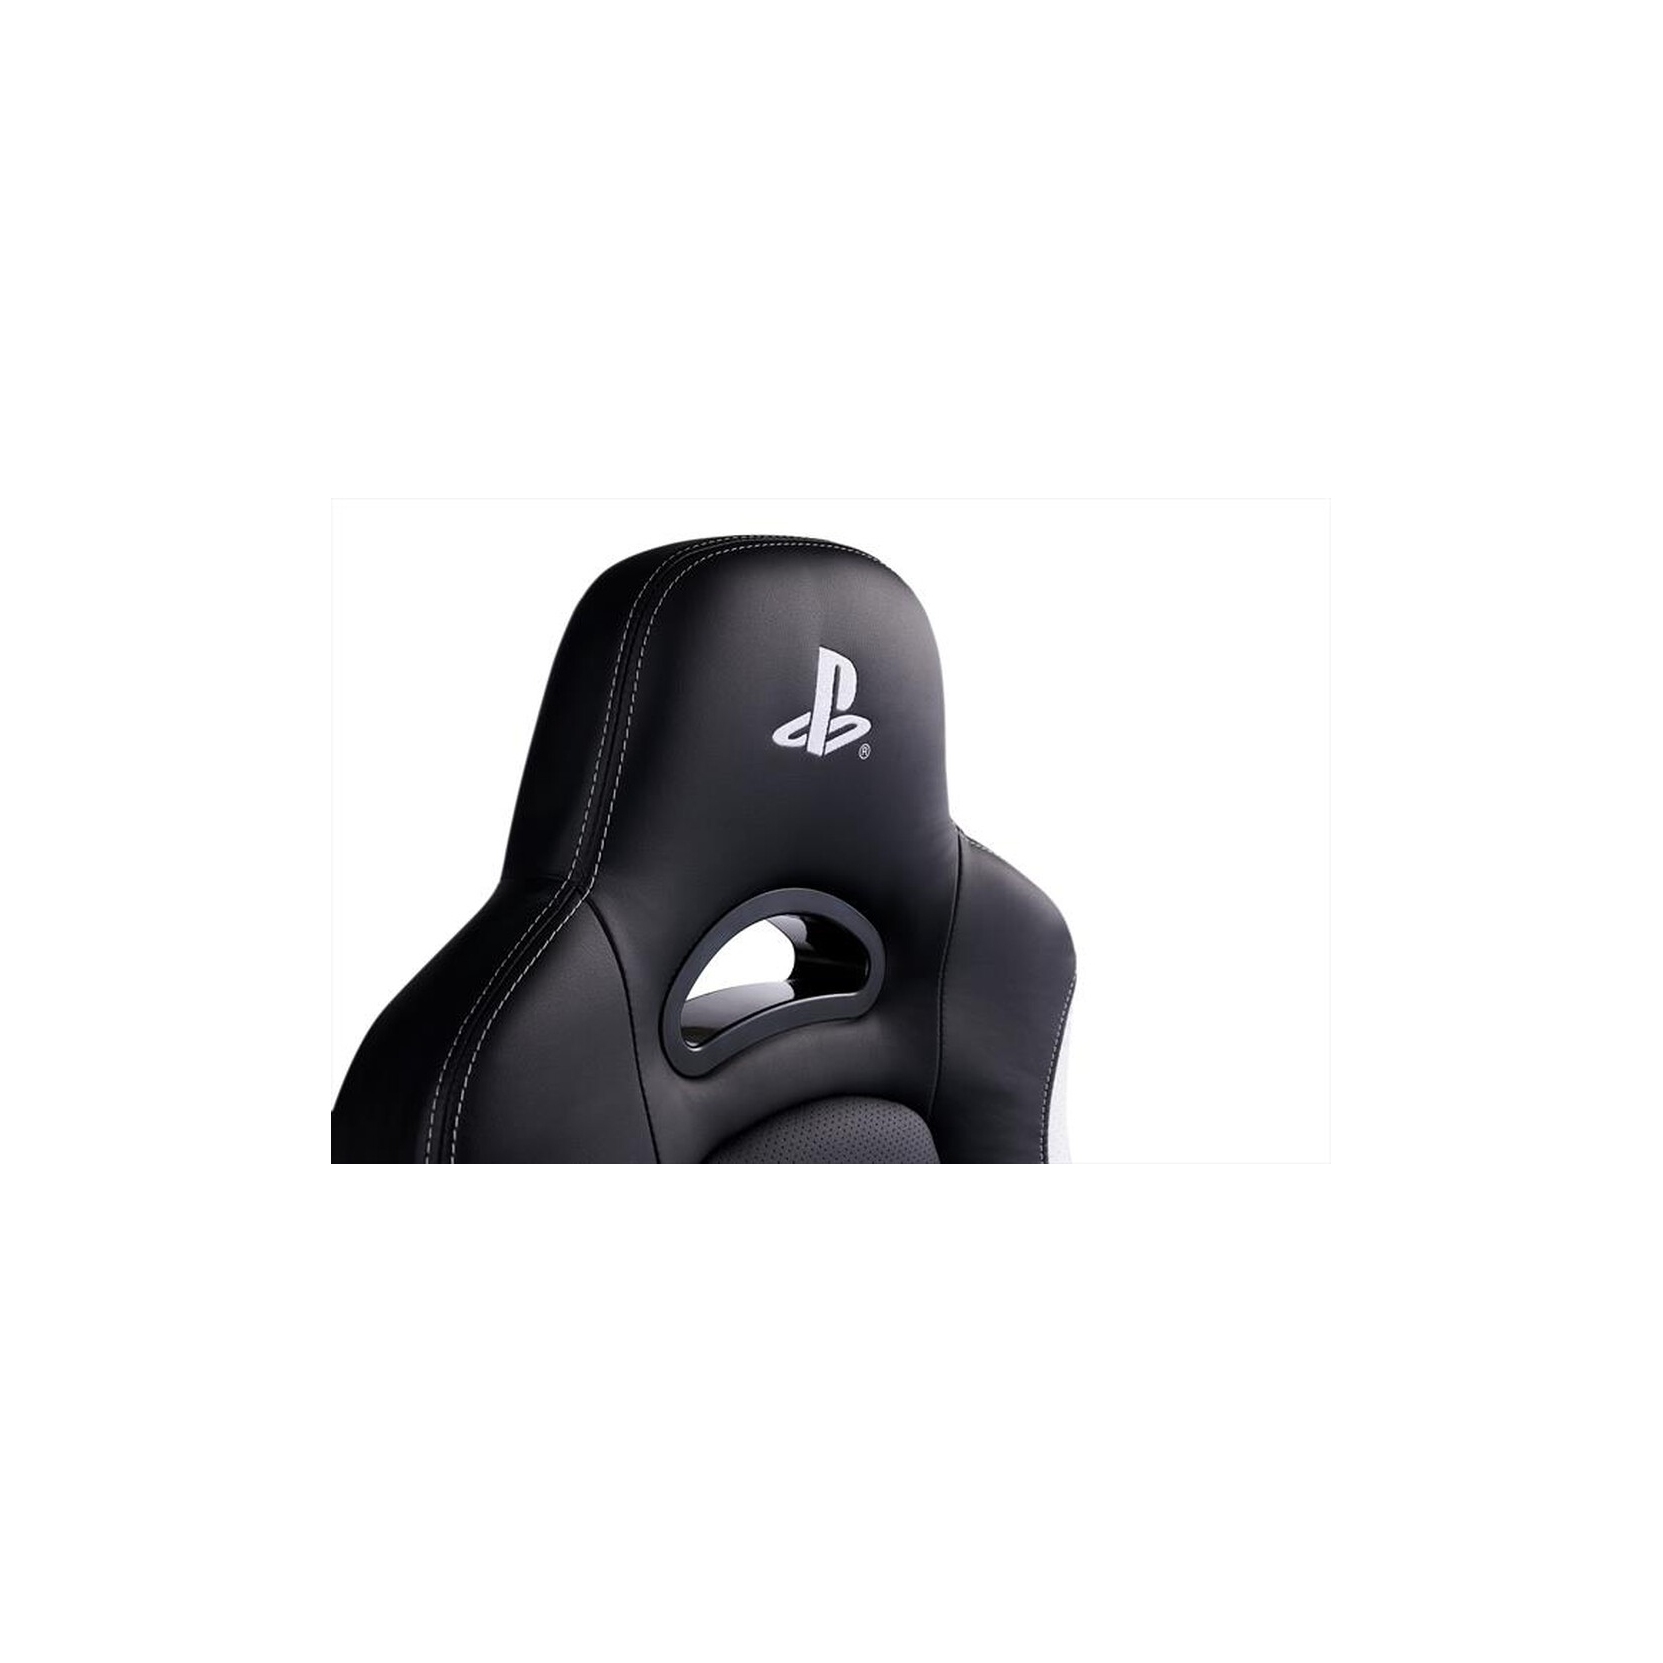 NACON CHAIRSONYPS SEDIA GAMING LICENZA UFFICIALE SONY PLAYSTATION